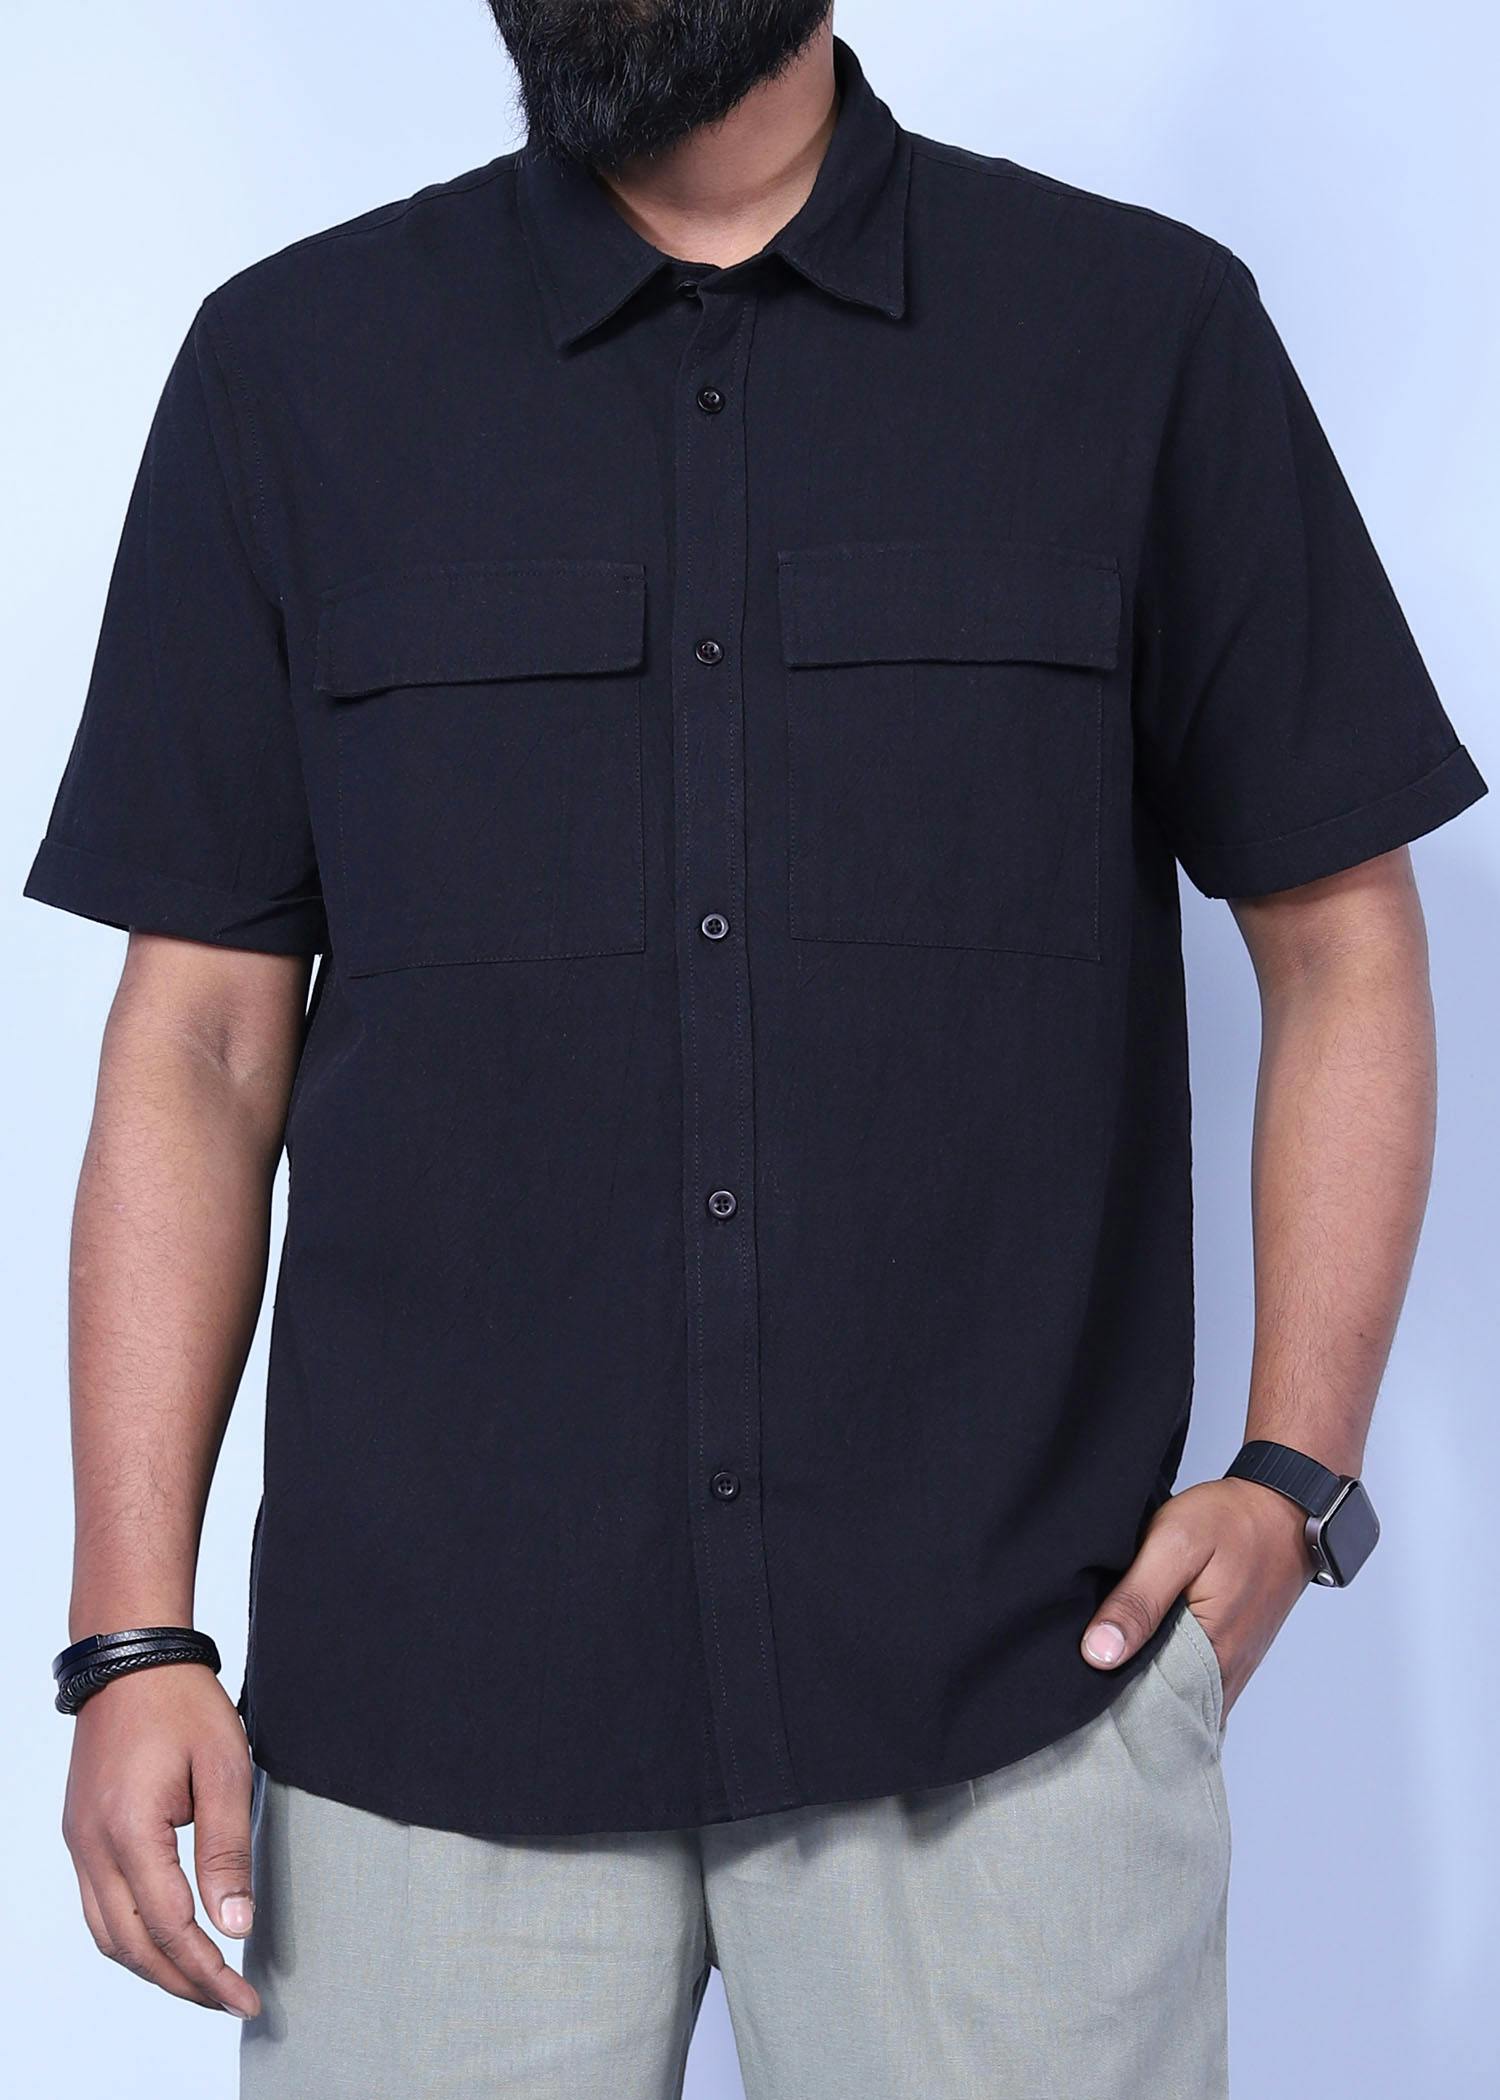 istanbul xxi hs shirt black color facecropped